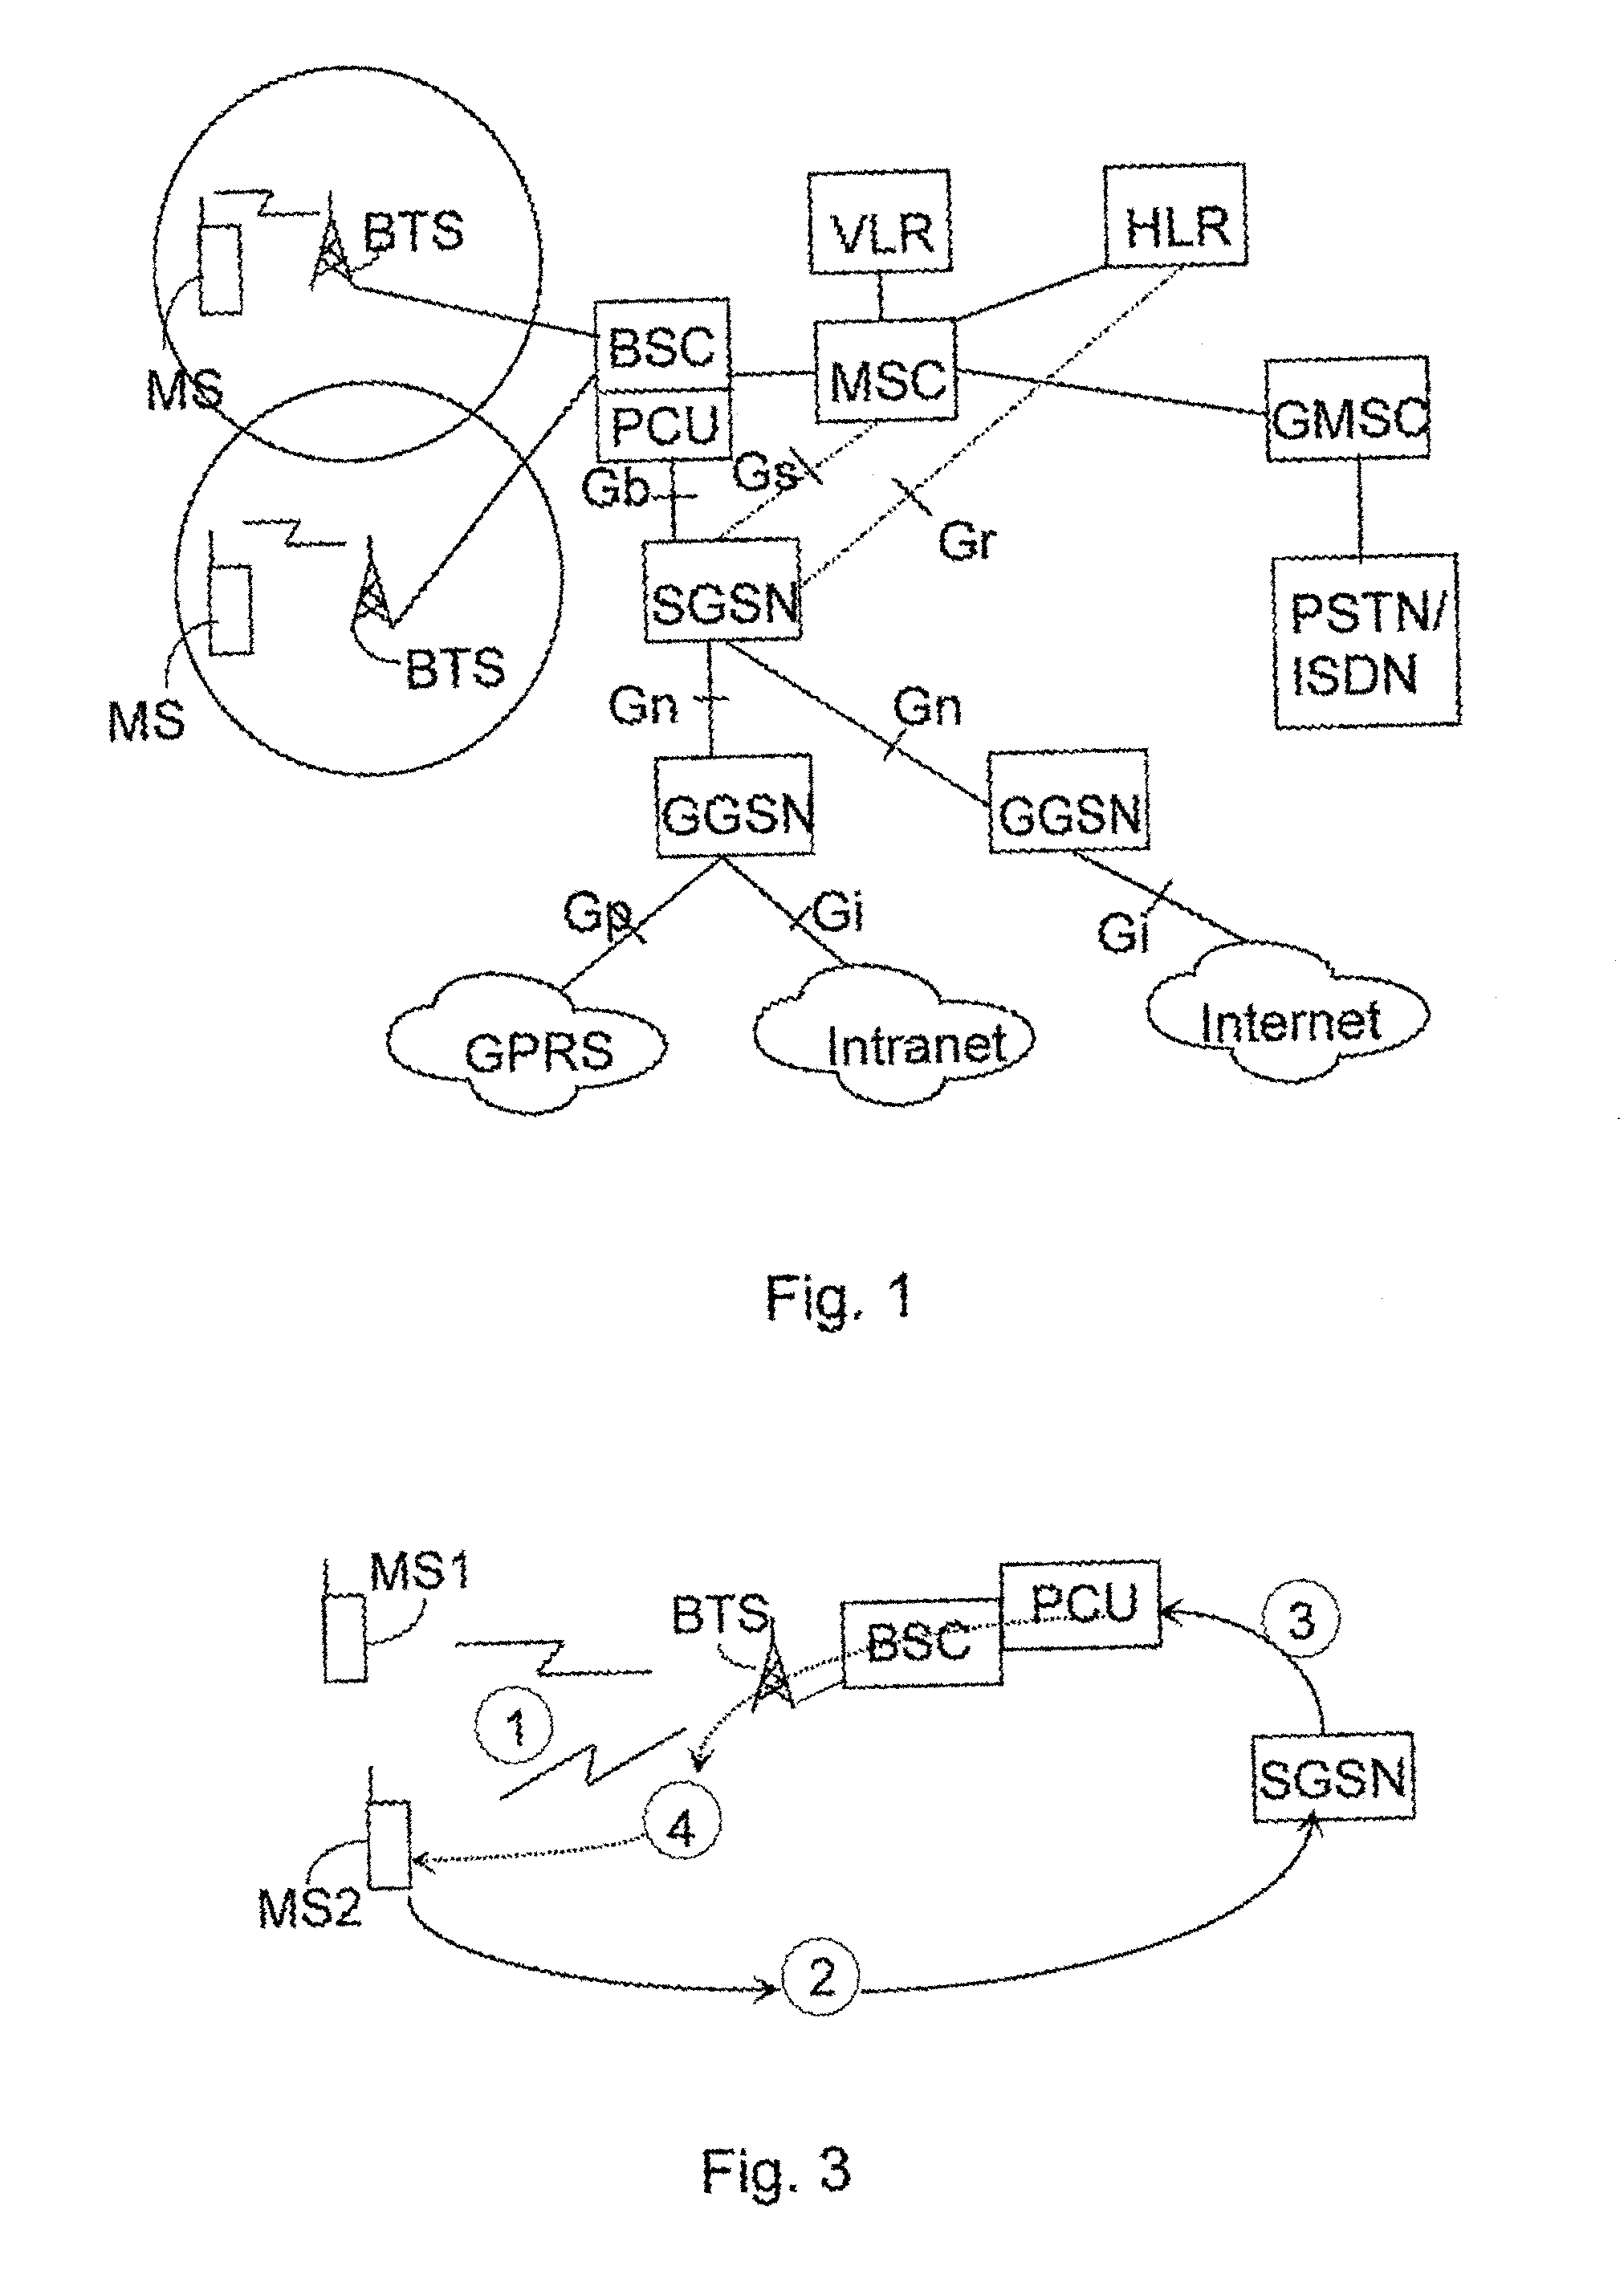 Transmitting connection set-up parameters in packet data network